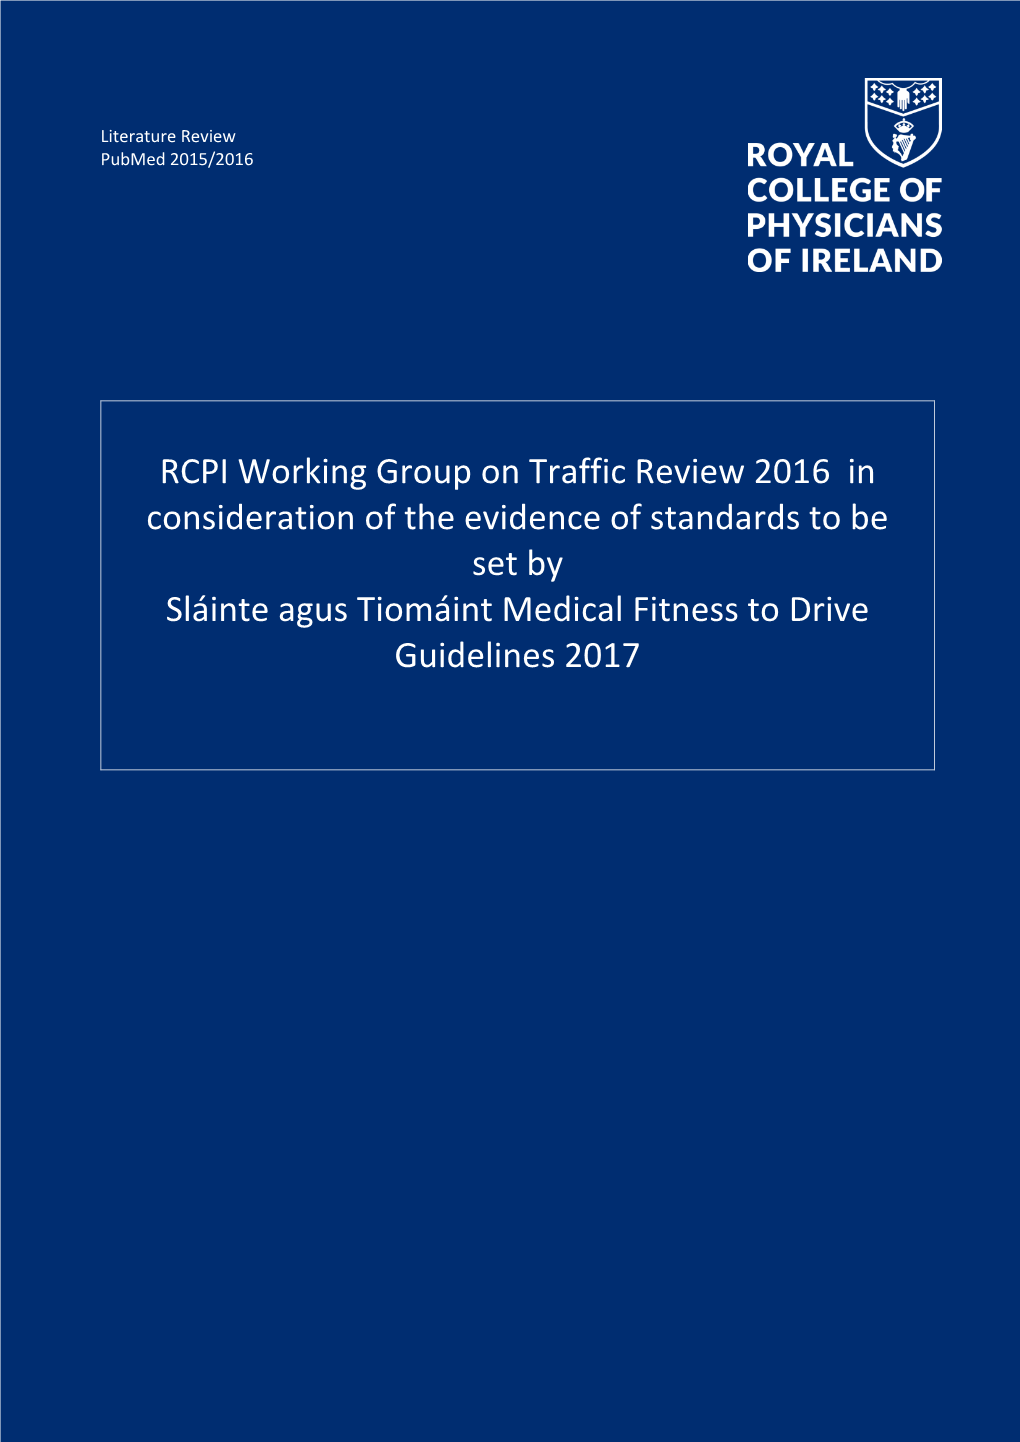 RCPI Working Group on Traffic Review 2016 in Consideration of the Evidence of Standards to Be Set by Sláinte Agus Tiomáint M